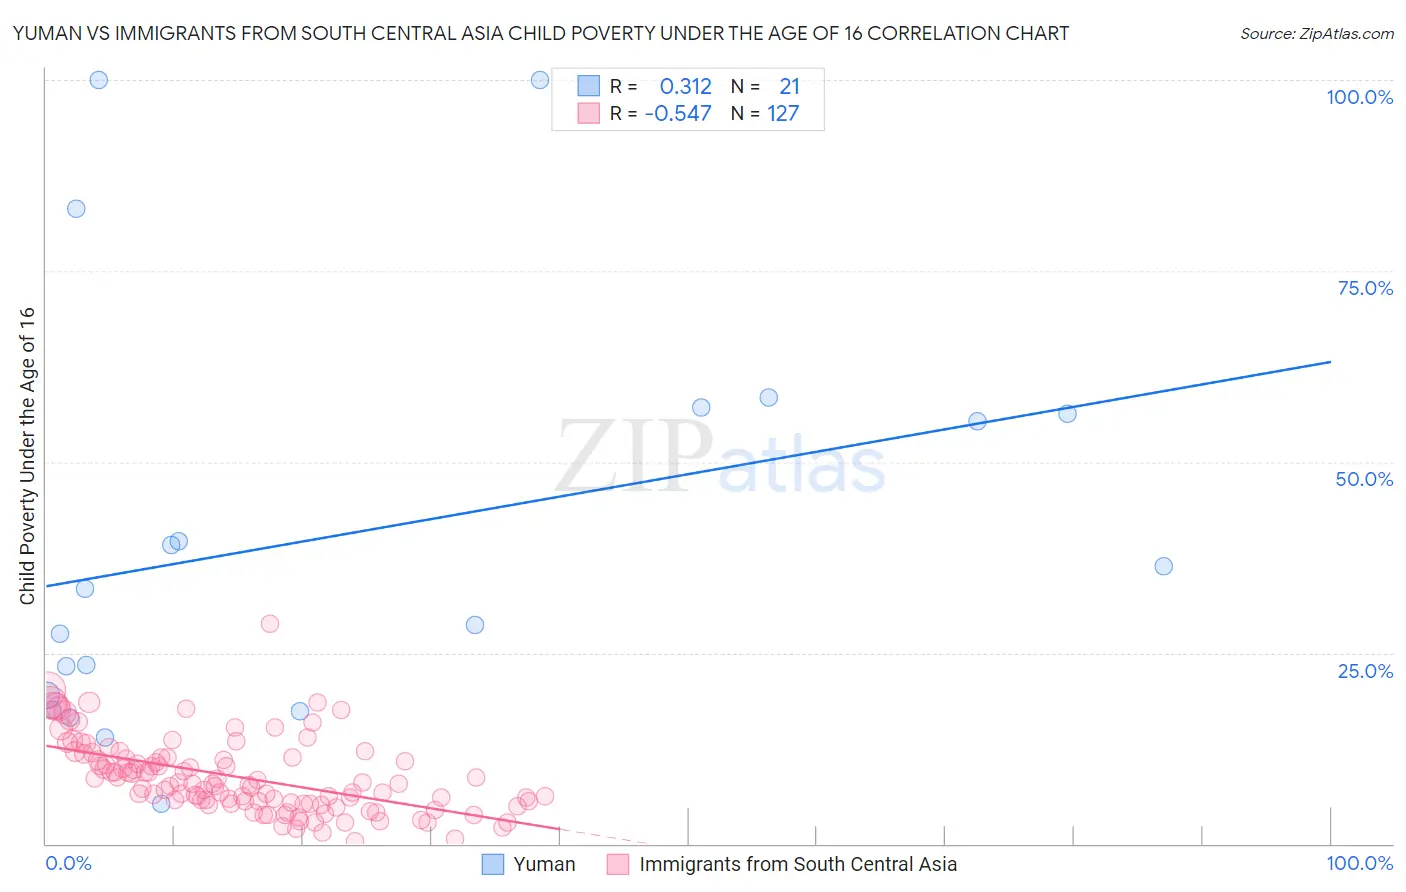 Yuman vs Immigrants from South Central Asia Child Poverty Under the Age of 16